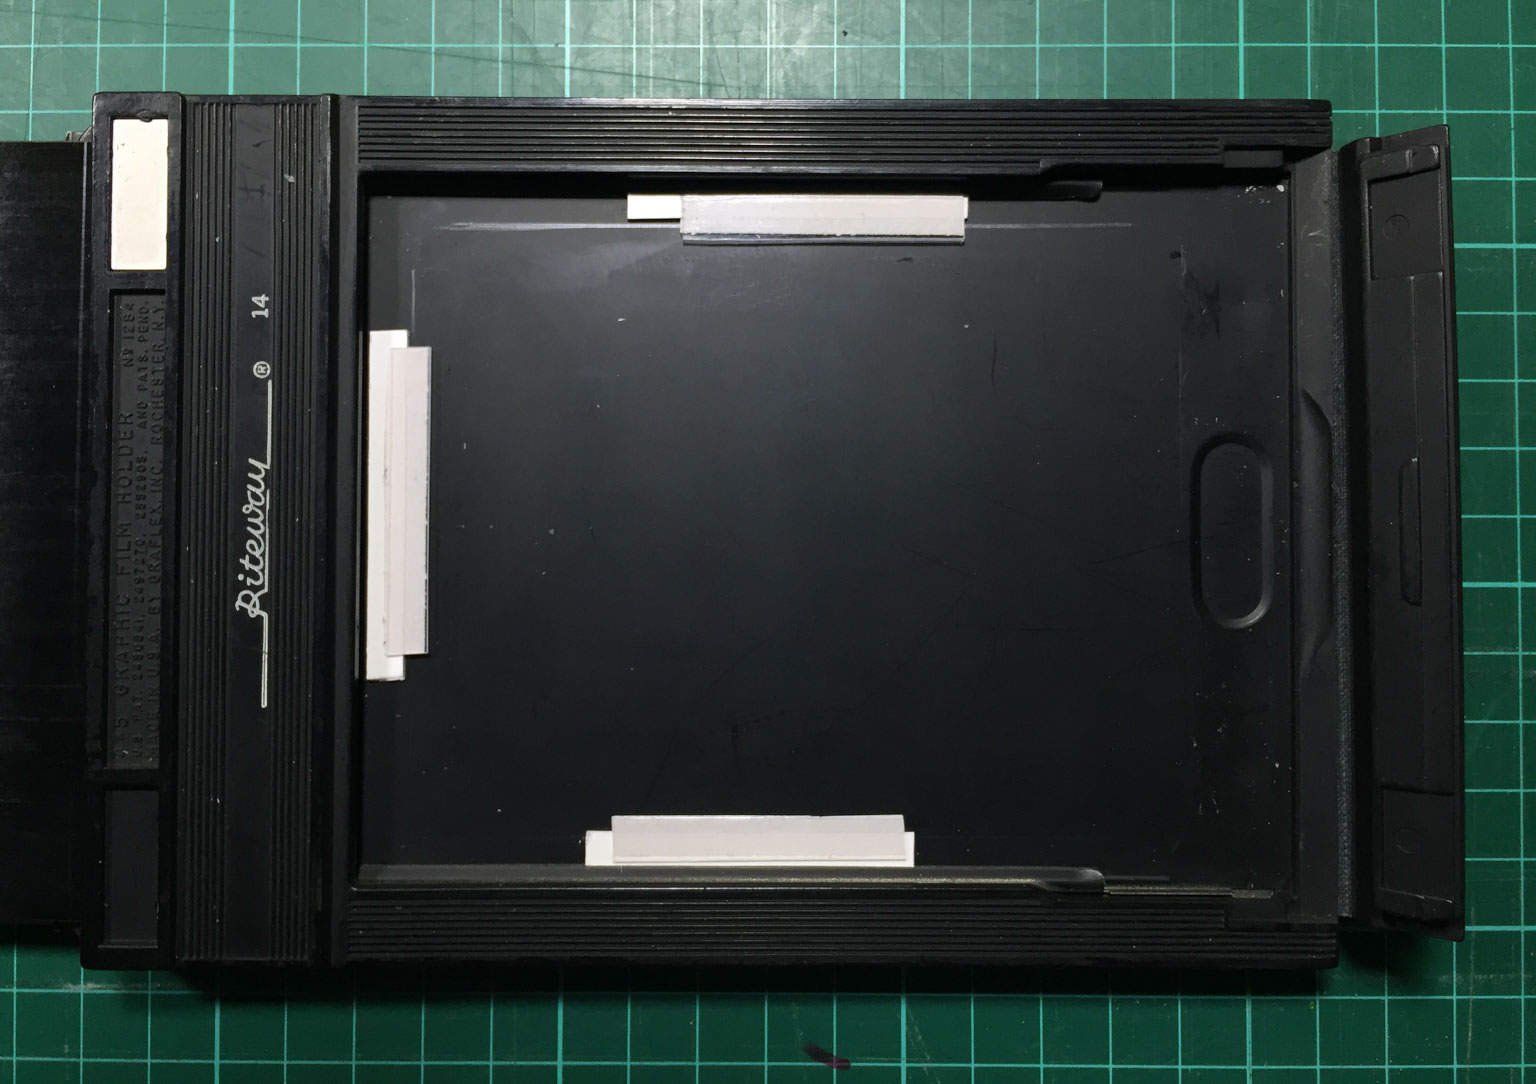 5 x 4 film holder modified for Instax Wide film